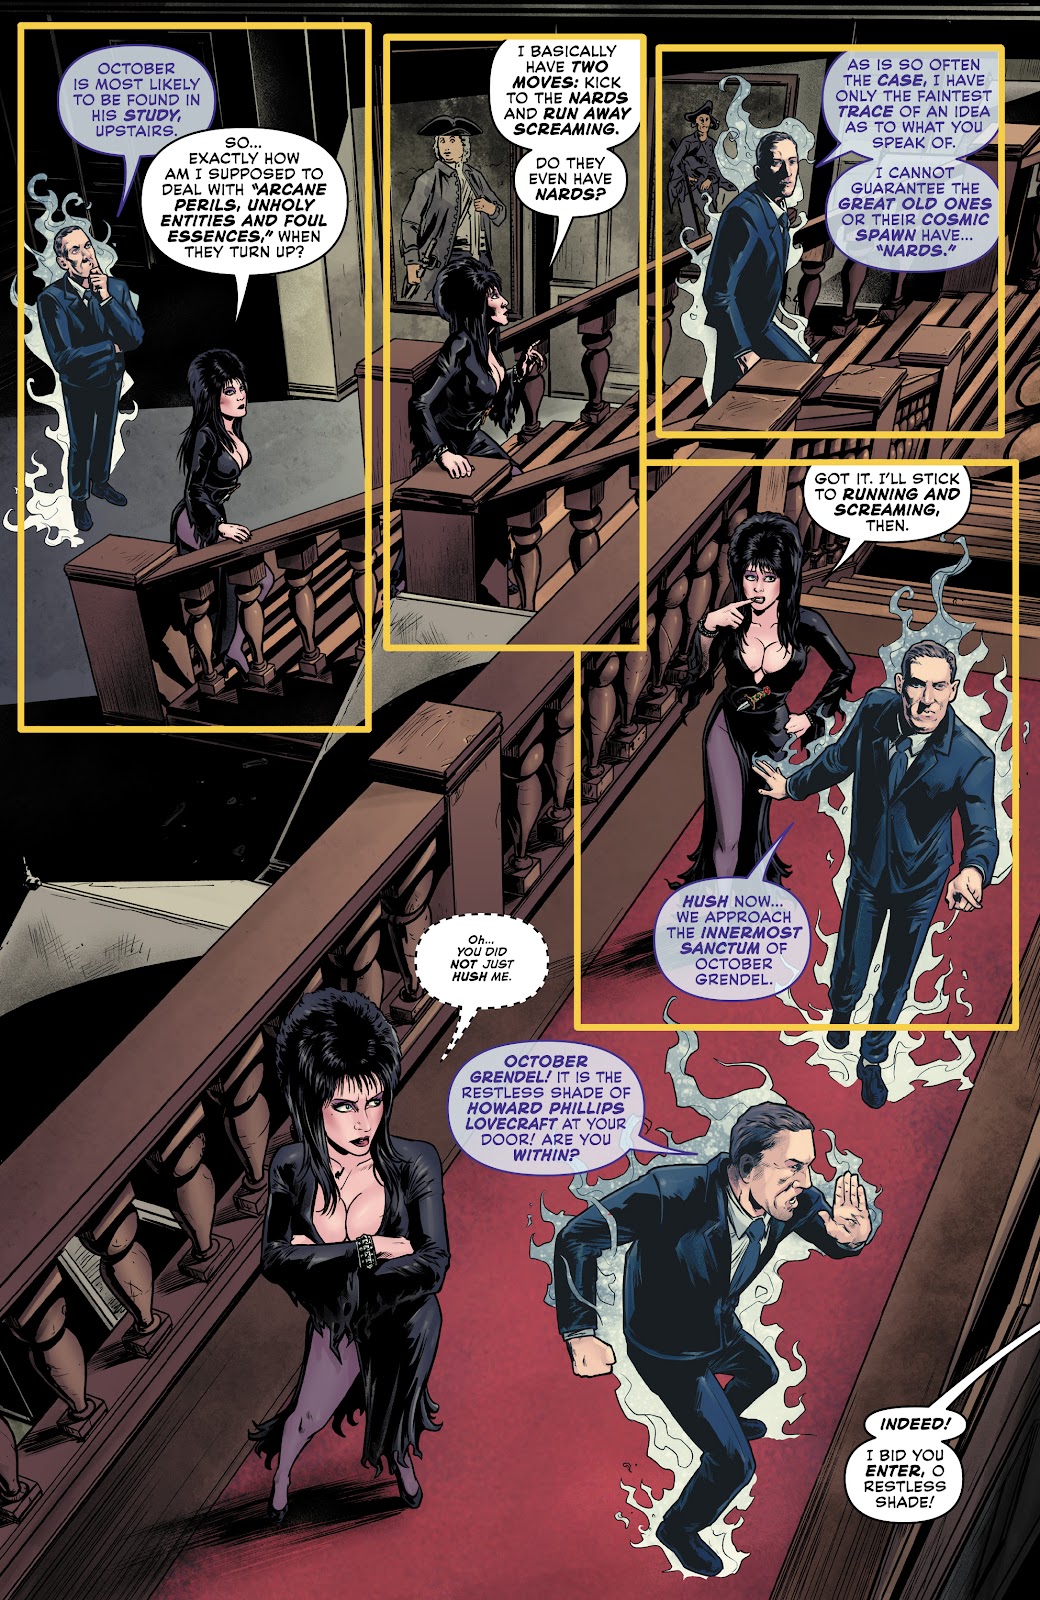 Elvira Meets H.P. Lovecraft issue 3 - Page 12